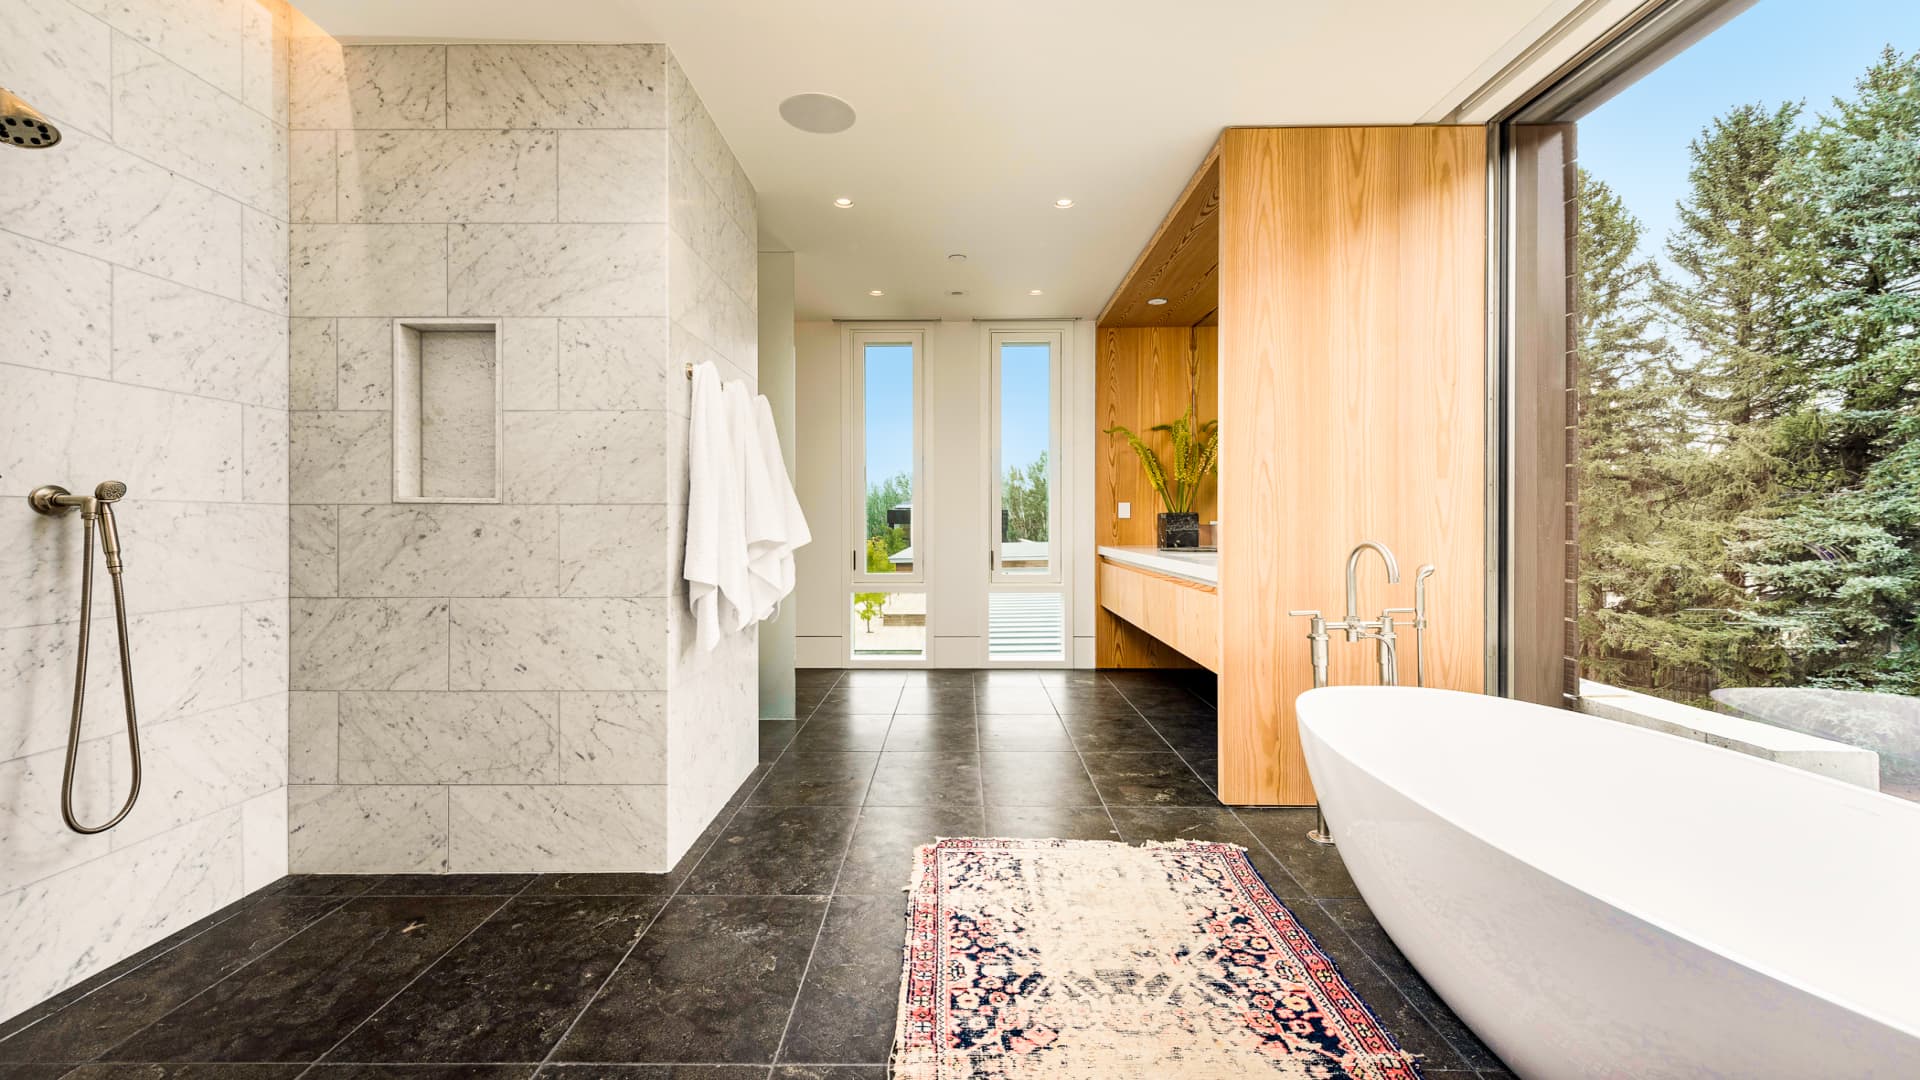 The second story spa-like primary bath clad in Carrera marble.